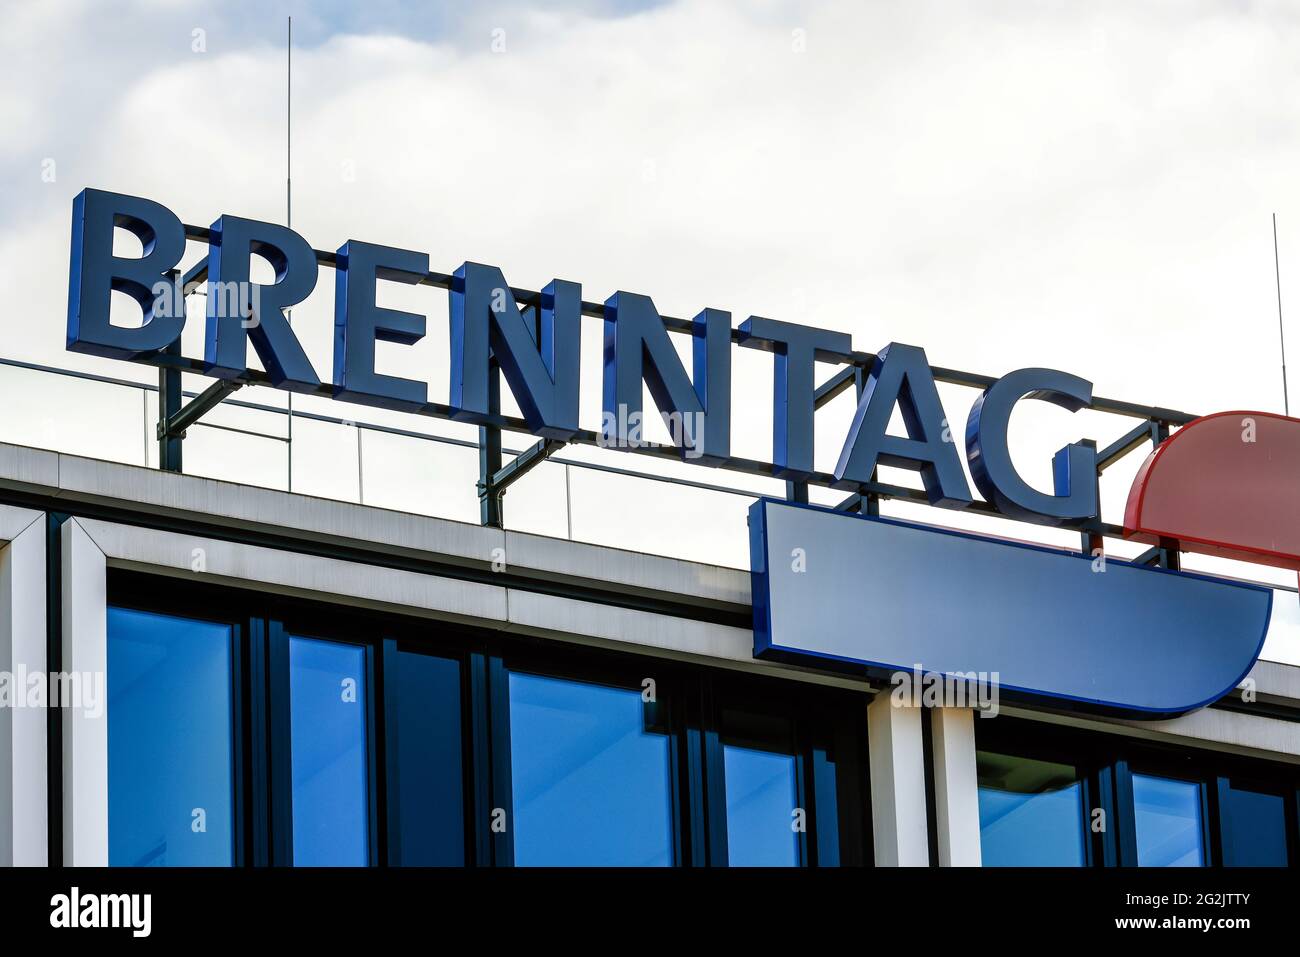 Essen, North Rhine-Westphalia, Germany - Brenntag, company logo on the facade of the Brenntag headquarters, Brenntag SE is the holding company for the Brenntag Group, the world market leader in the distribution of chemicals and ingredients. Stock Photo